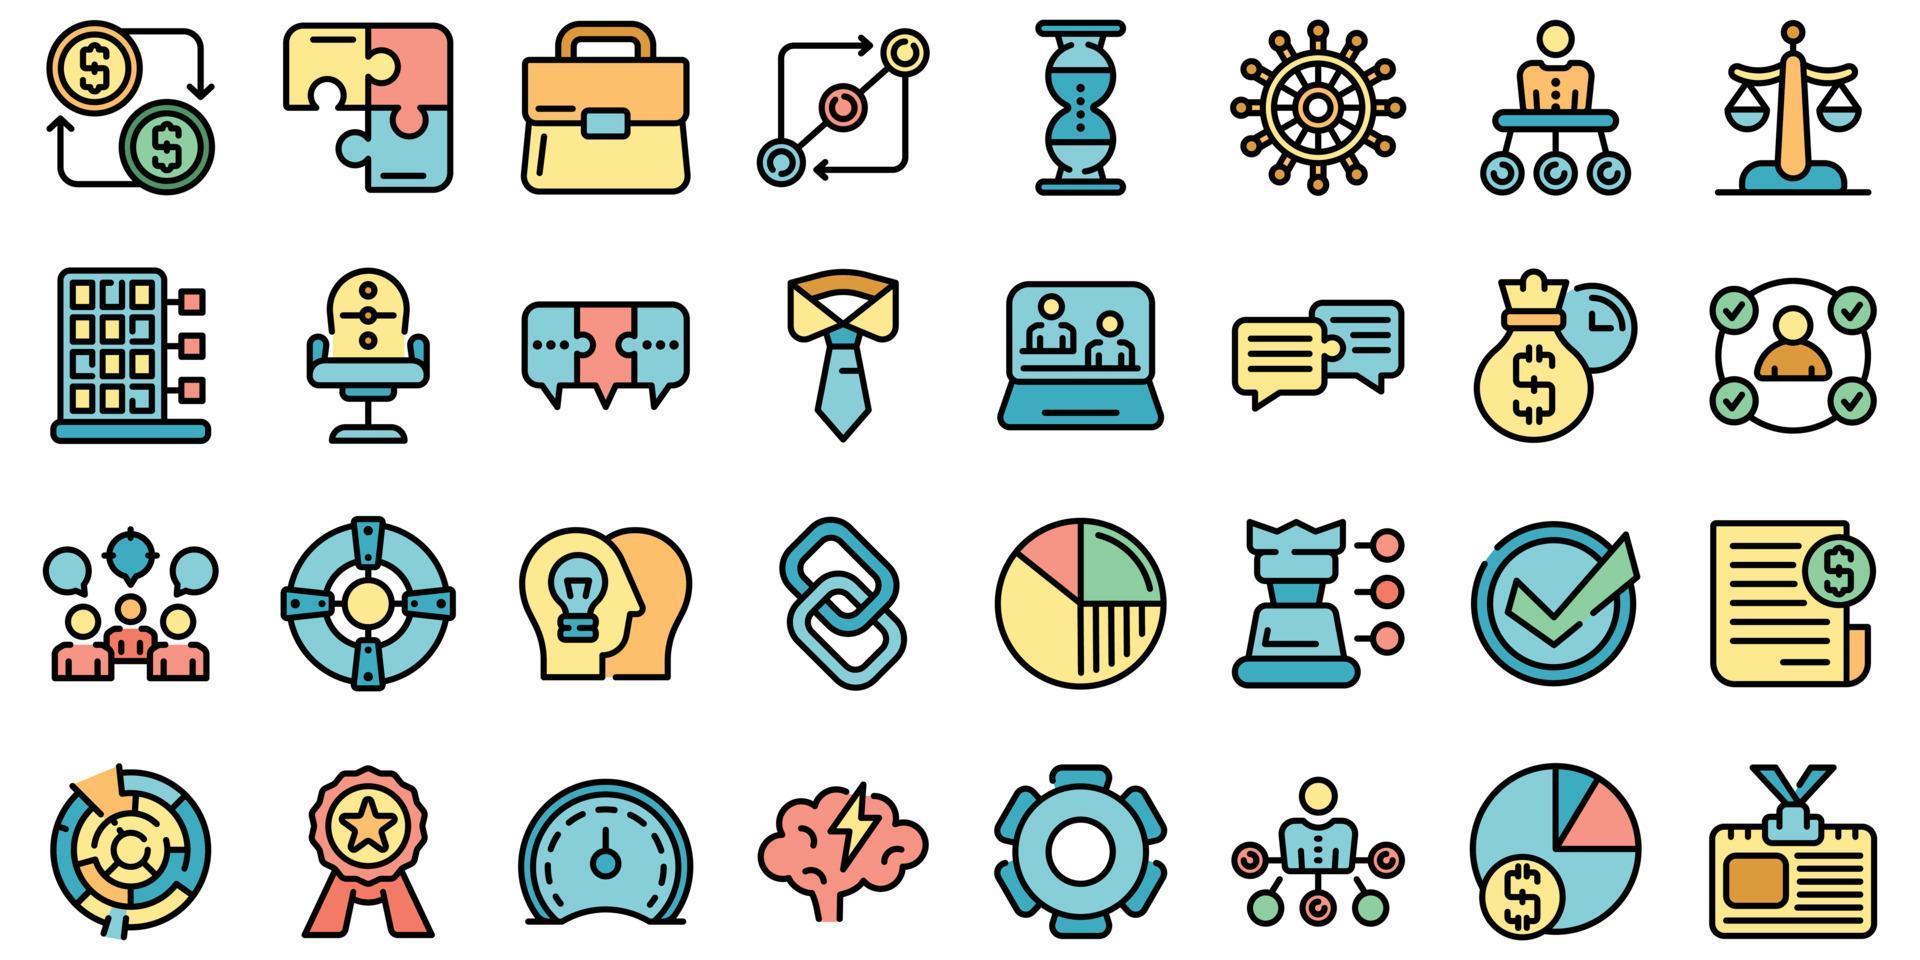 Business collaboration icons set vector flat